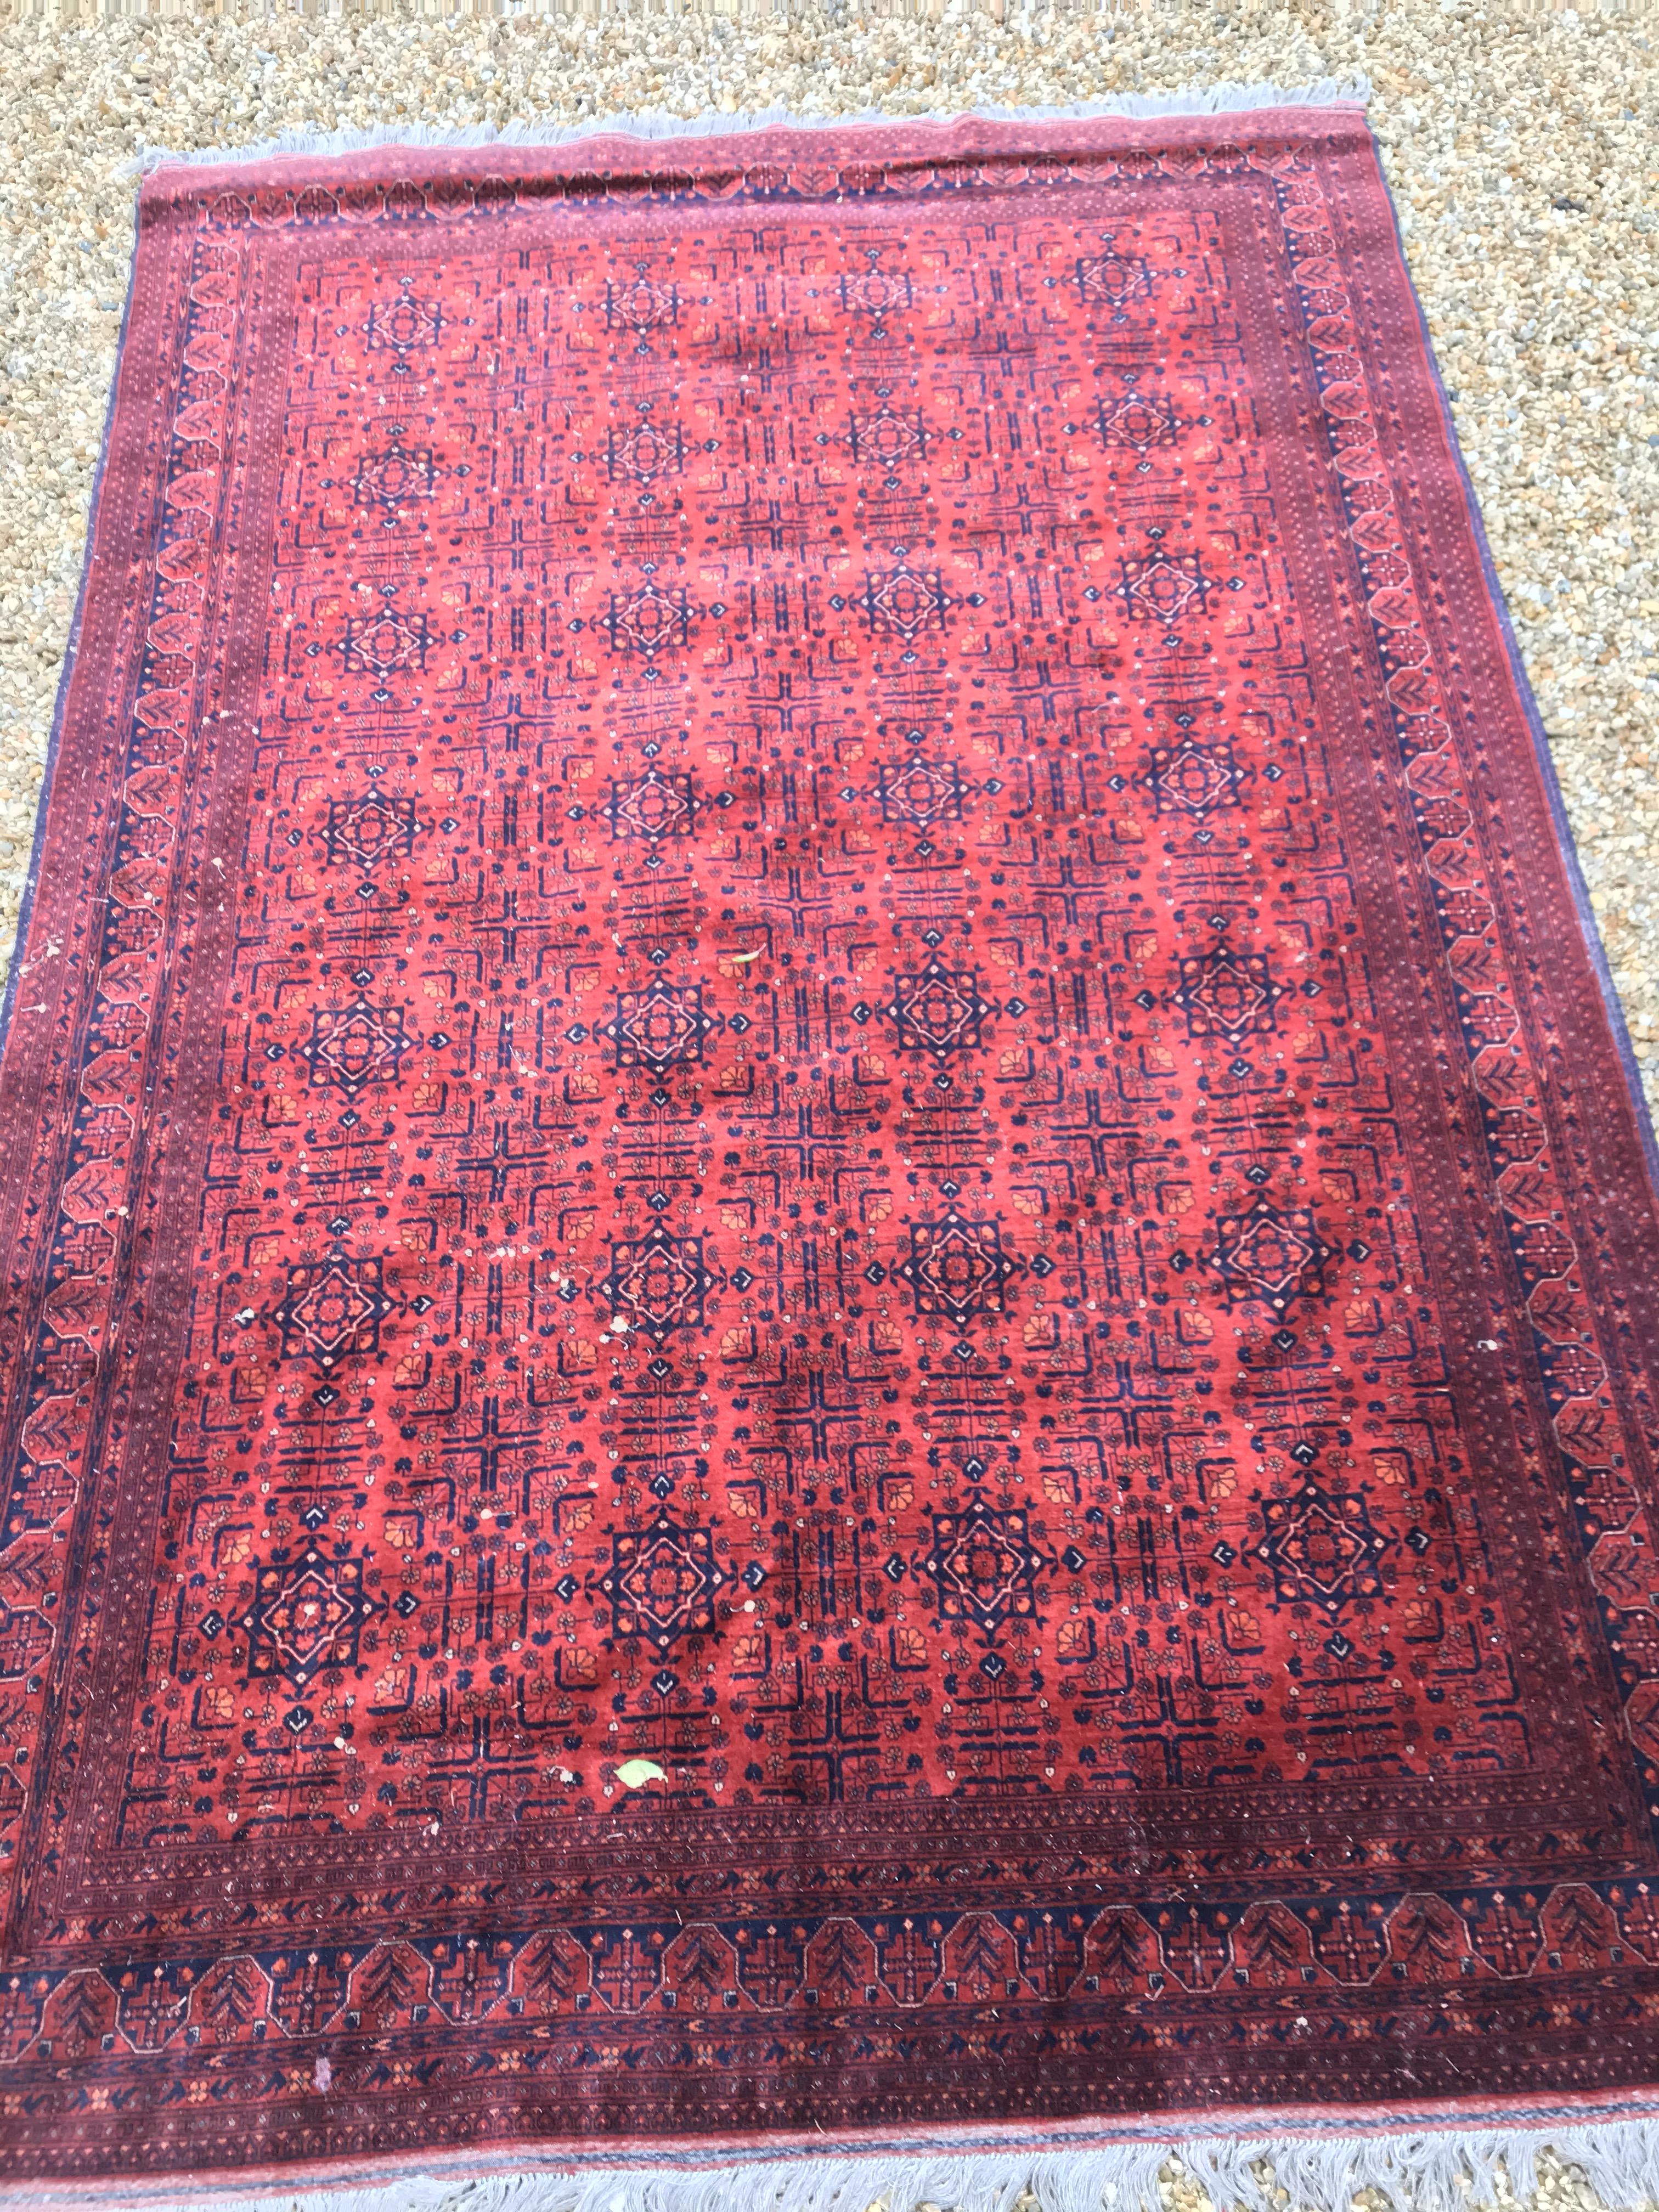 A Bokhara type carpet, the central panel set with repeating medallions on a dark red and black